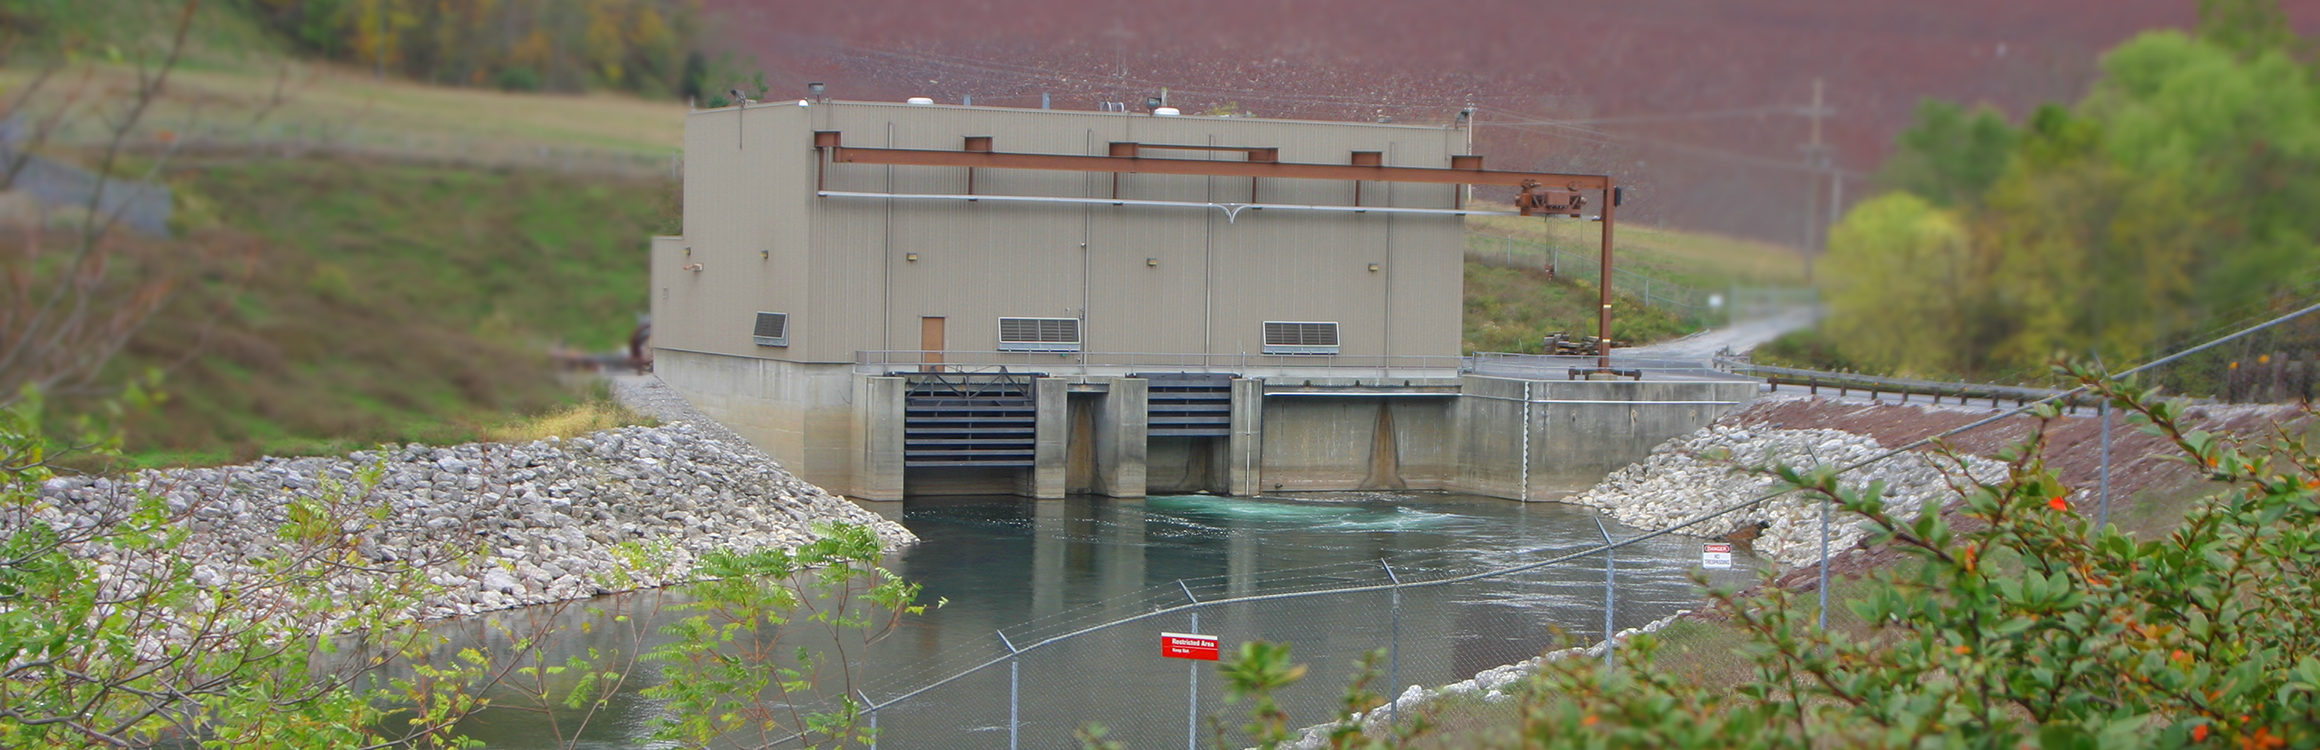 Raystown Hydroelectric Project